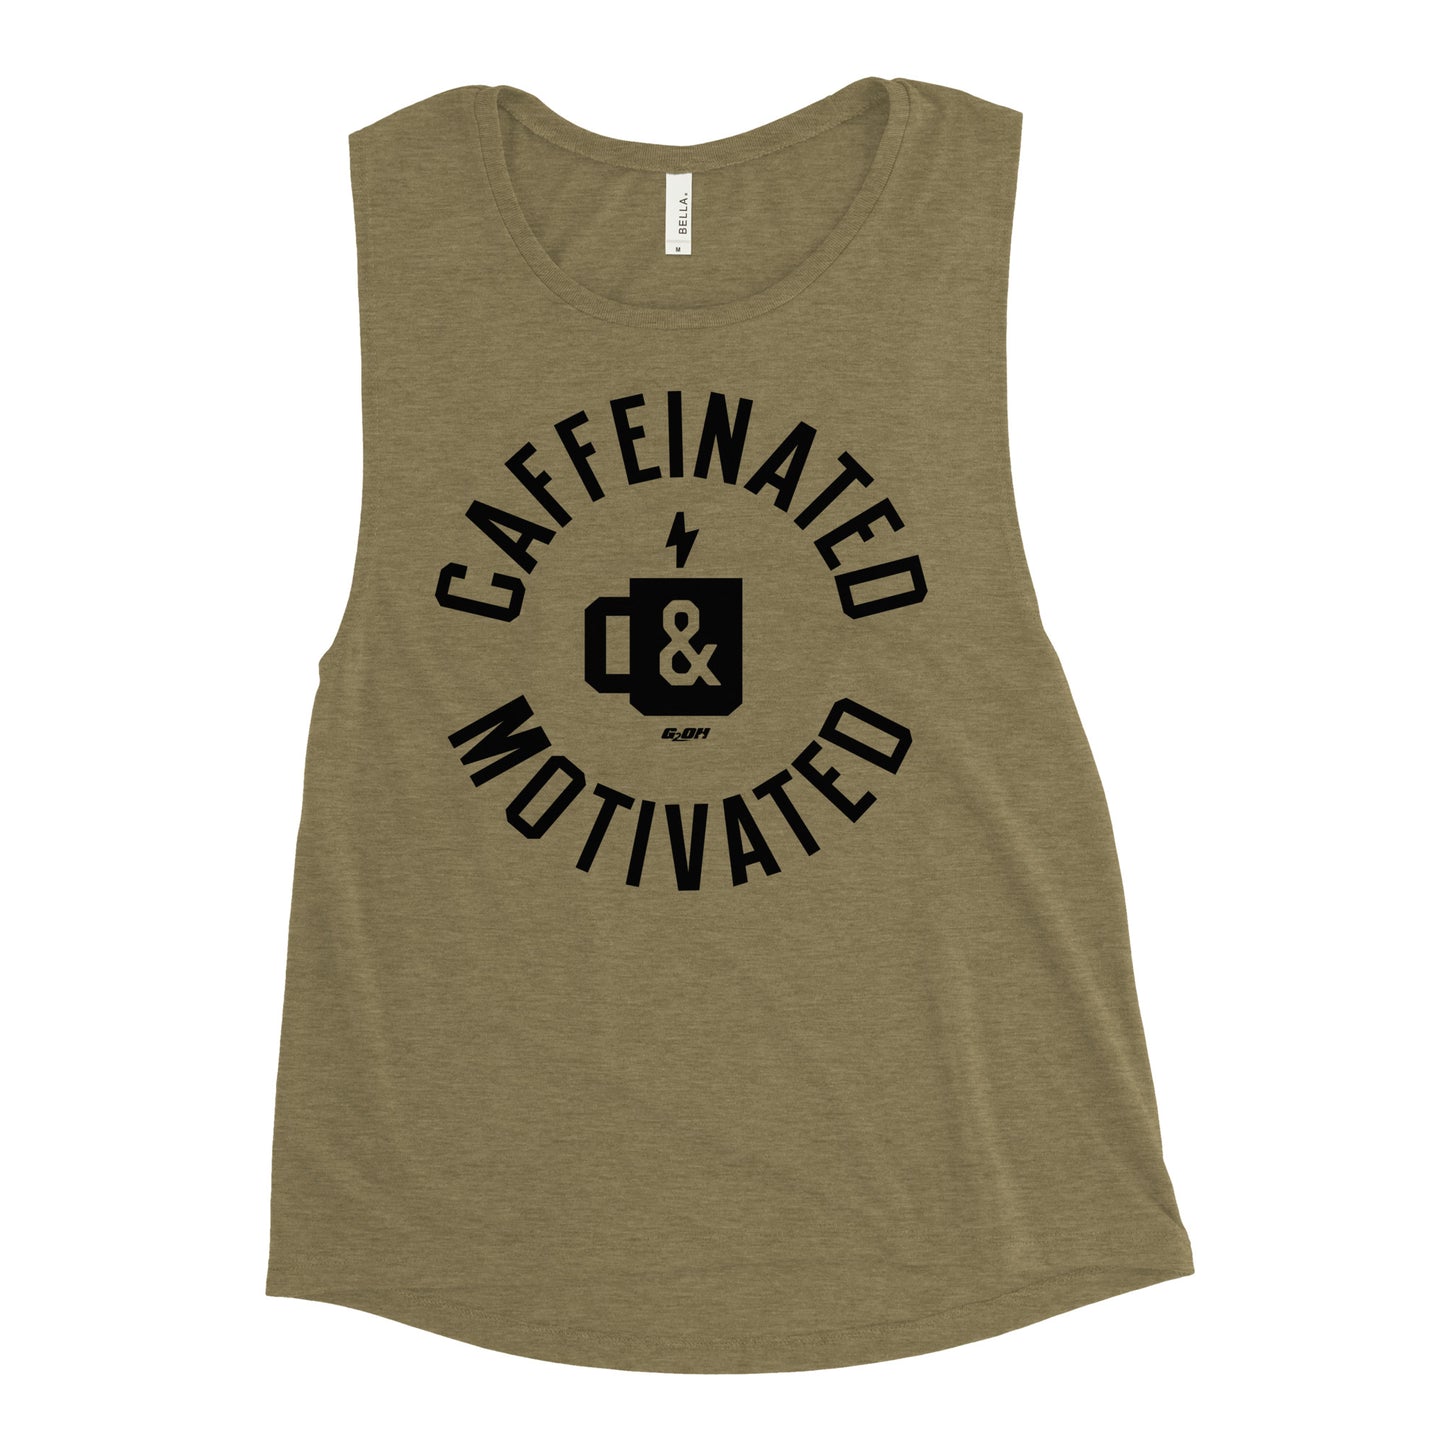 Caffeinated And Motivated Women's Muscle Tank